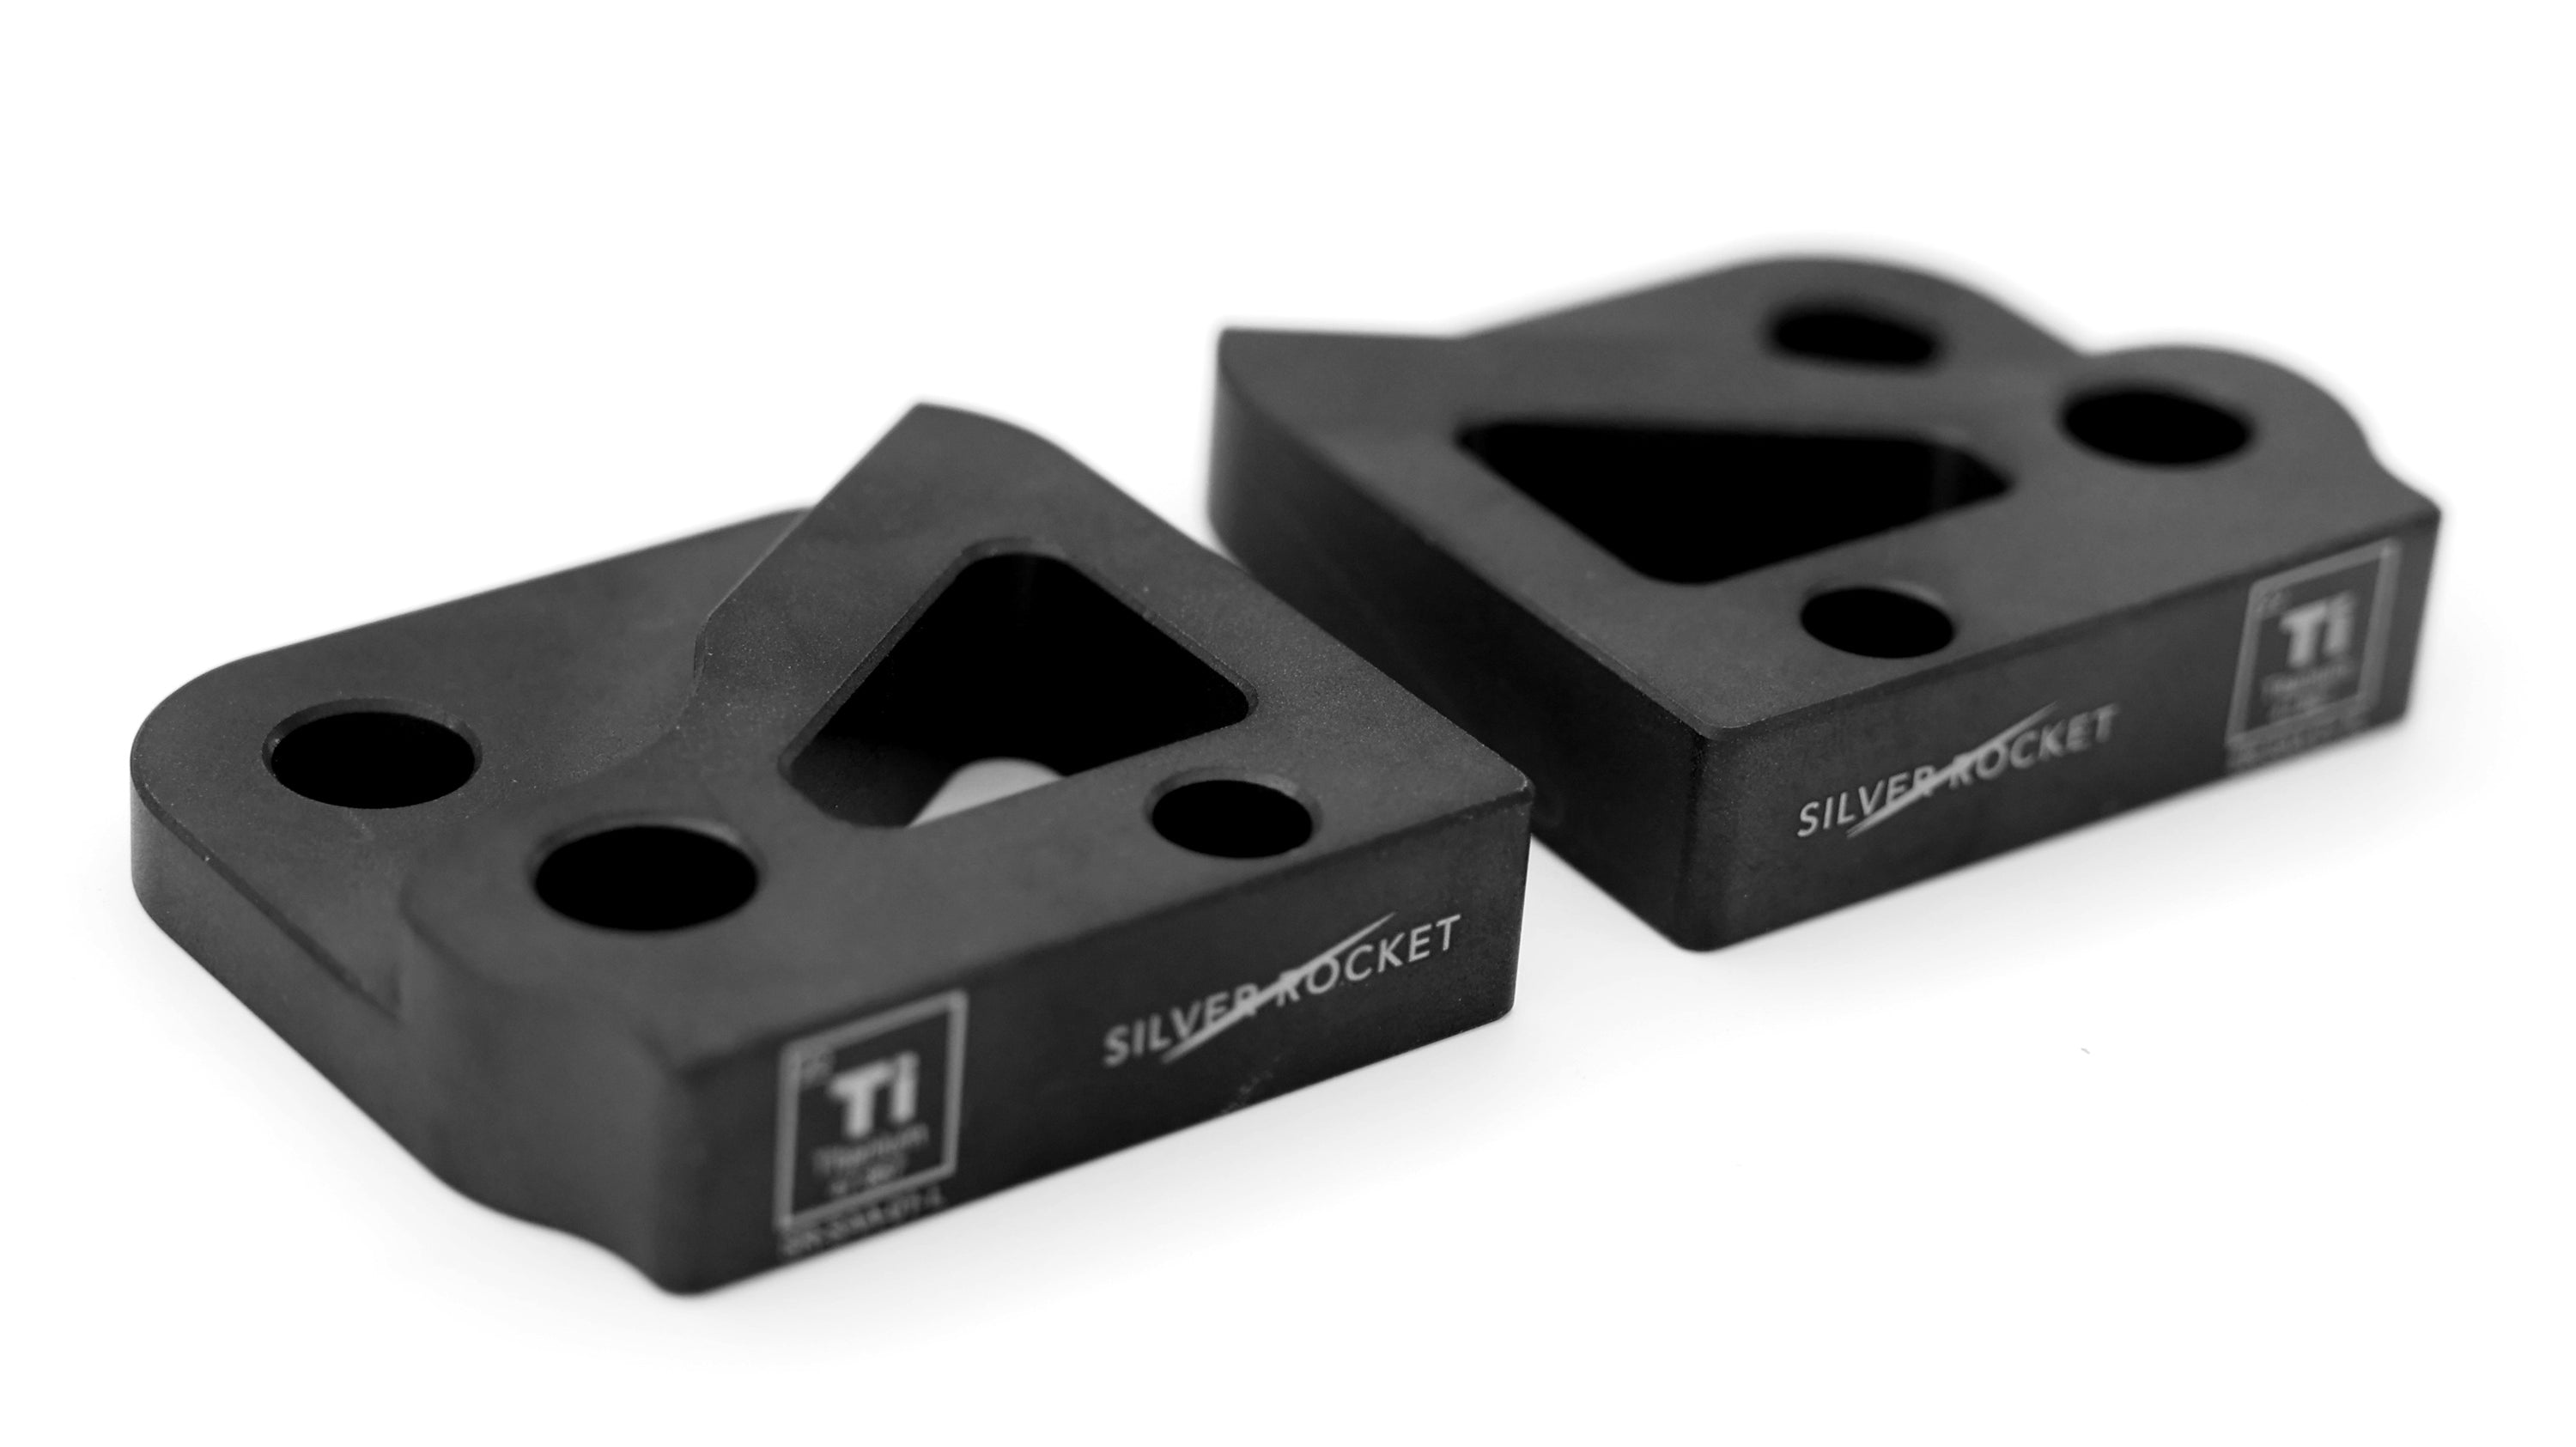 Enhance Your Driving Experience with the new SR Porsche LWB Seat Angle Adjuster.